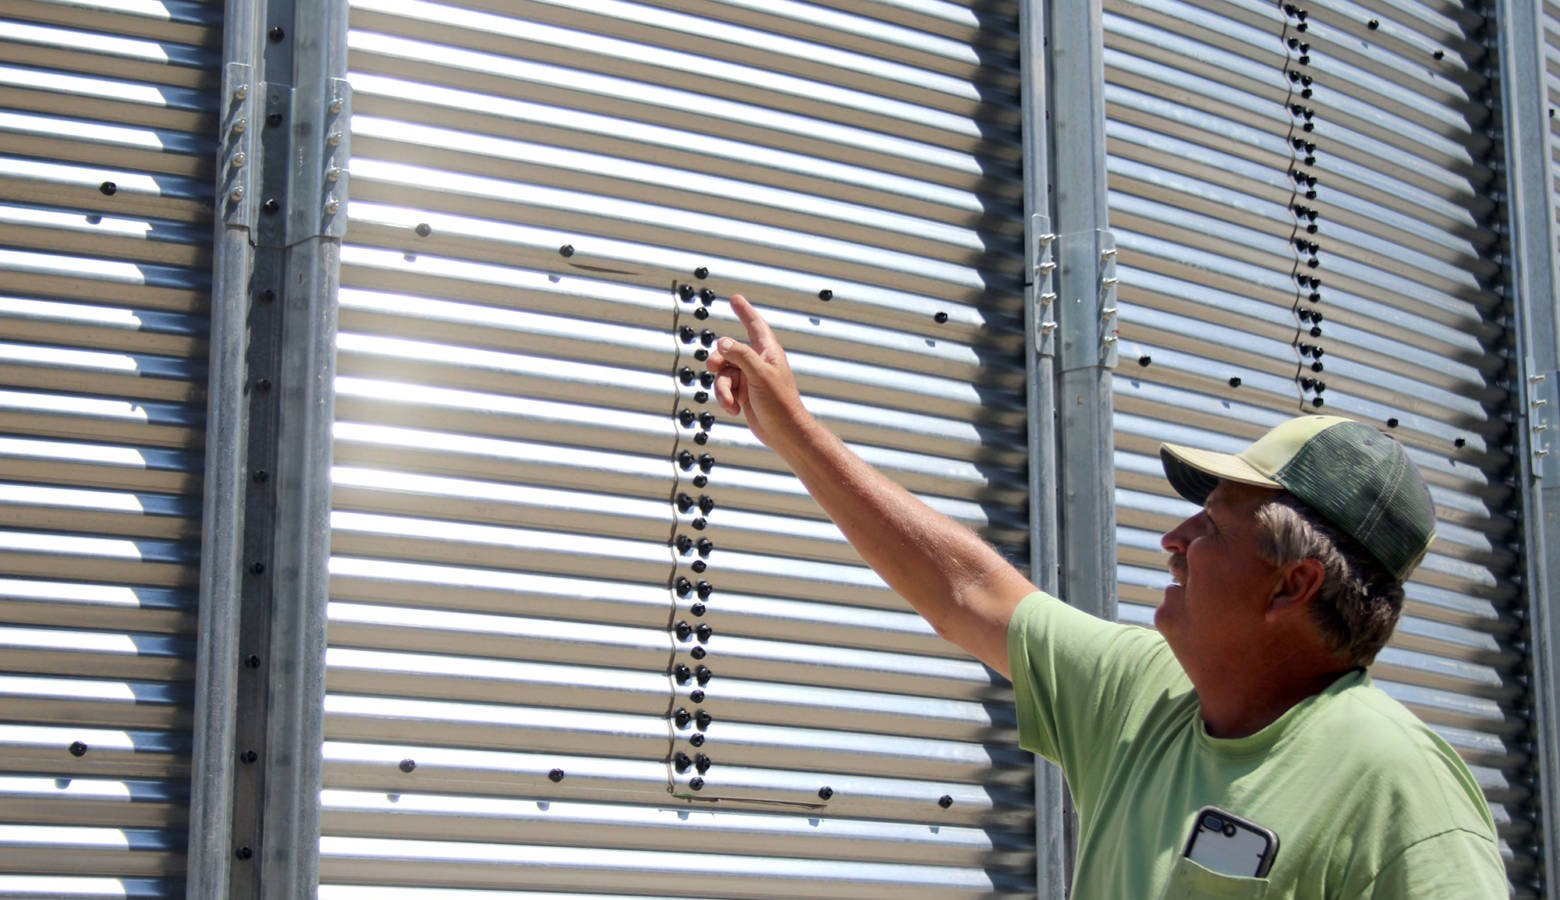 Mike Morehouse, a fifth generation farmer in Elkhart, Indiana, points to his new grain bin. (Samantha Horton/IPB News)